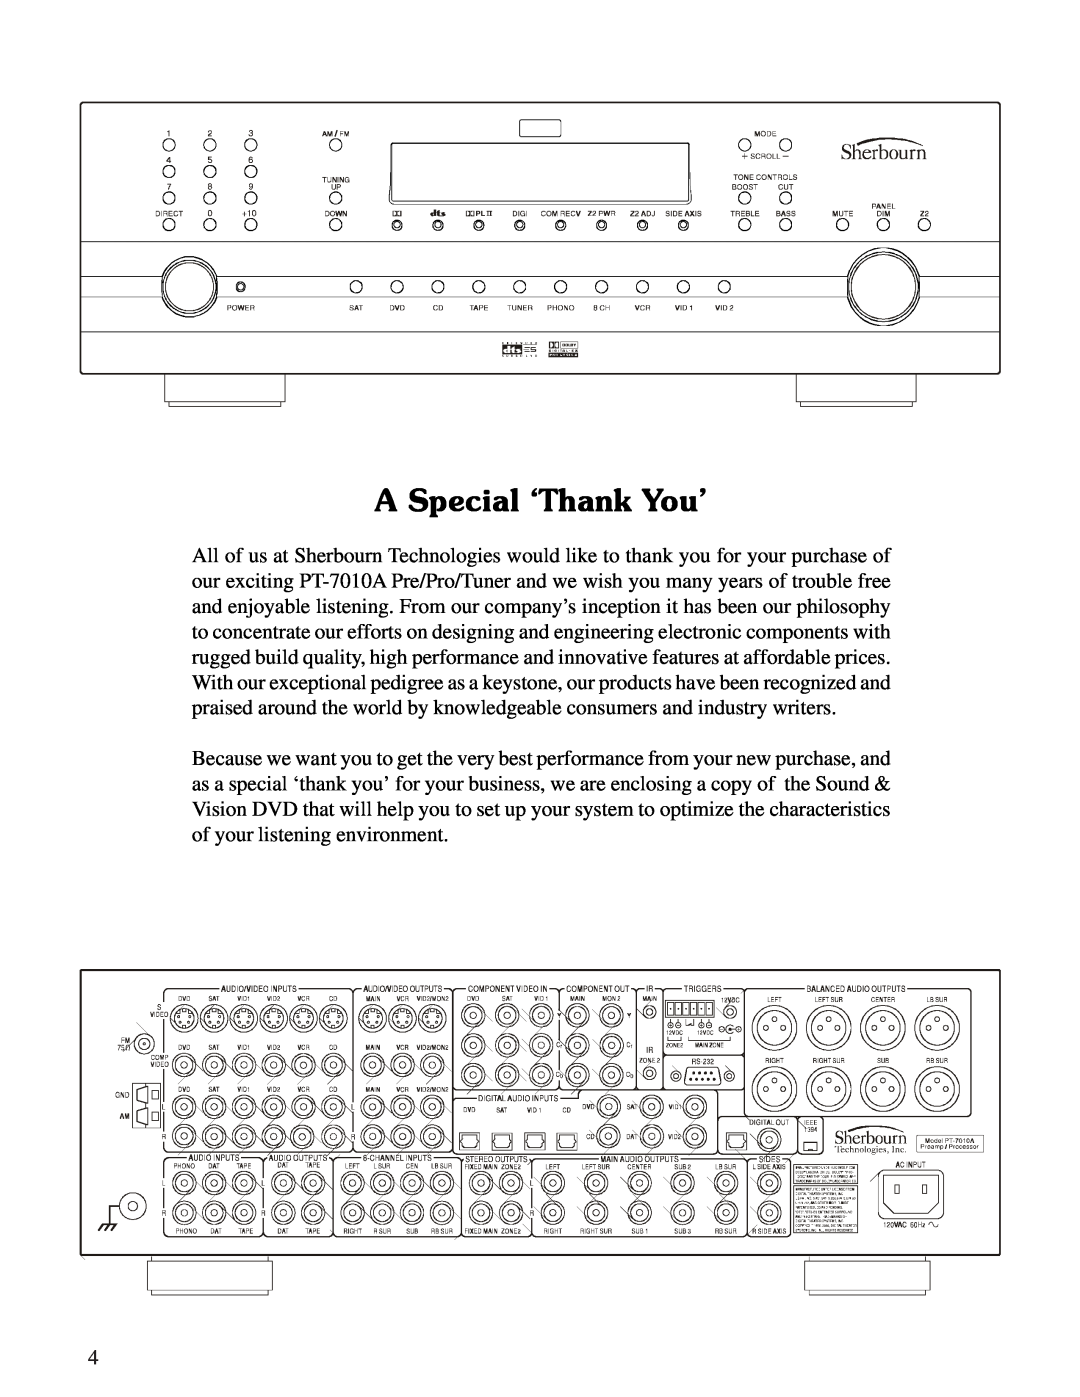 Sherbourn Technologies PT-7010A owner manual A Special ‘Thank You’ 